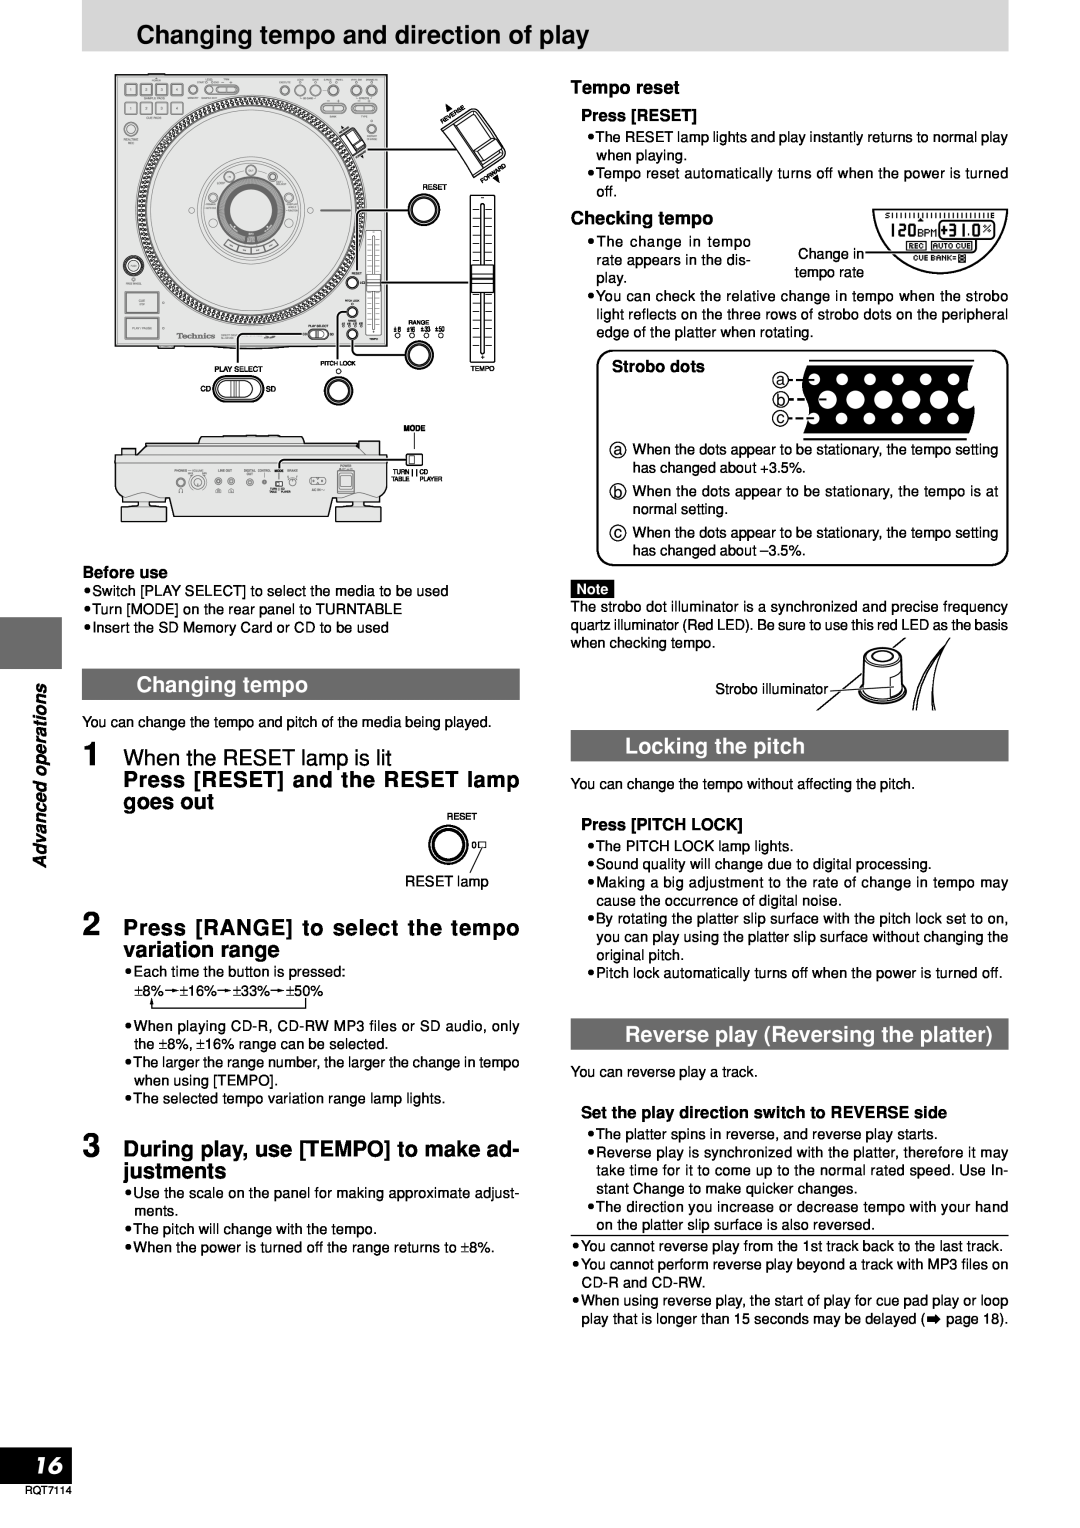 Panasonic SL-DZ1200 manual Changing tempo and direction of play, When the RESET lamp is lit, Locking the pitch, Tempo reset 